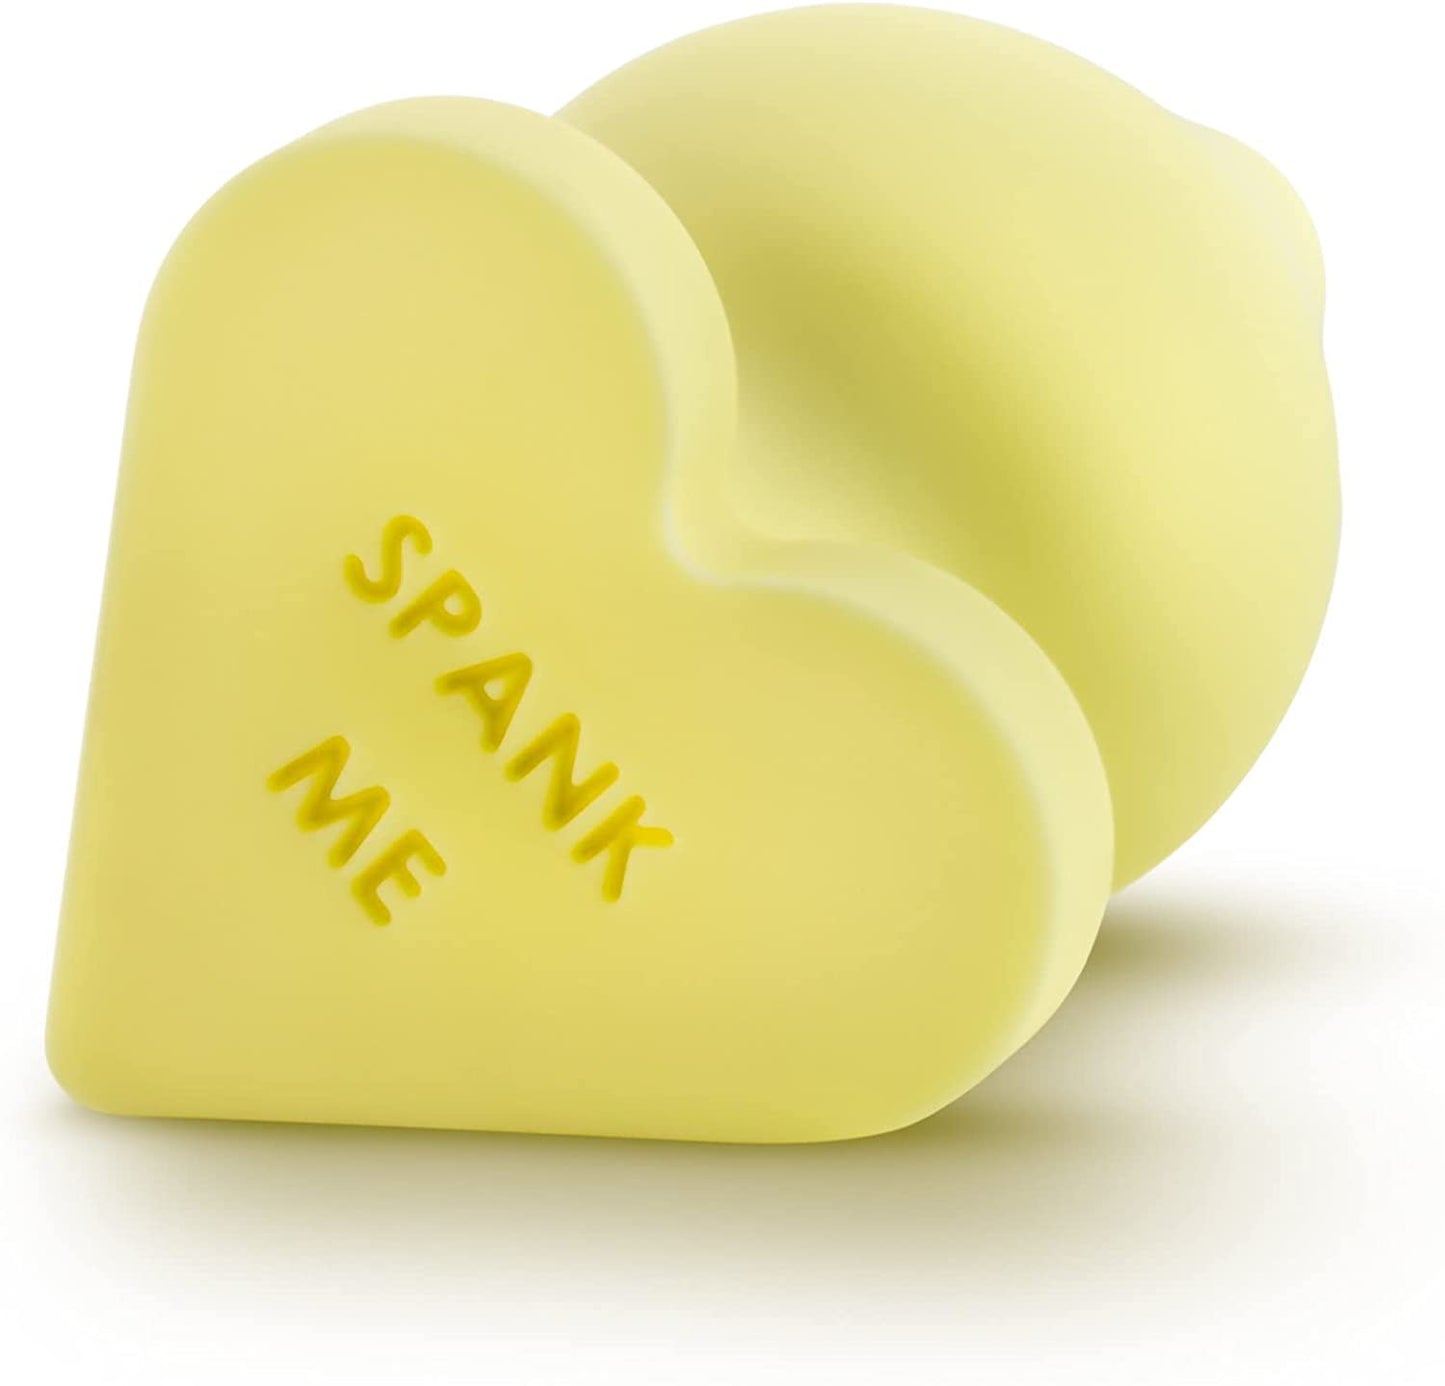 Blush Novelties Play with Me, Naughty Candy Heart Spank Me Yellow Smooth Satin Finish Heart Shaped Bottom Anal Butt Plug - Platinum Silicone - Sex Toy for Men and Women. The Blush Naughty Candy Hearts are adorable heart-shaped butt plugs that are the perfect gift for yourself or your lighthearted lover. Same Day Ship